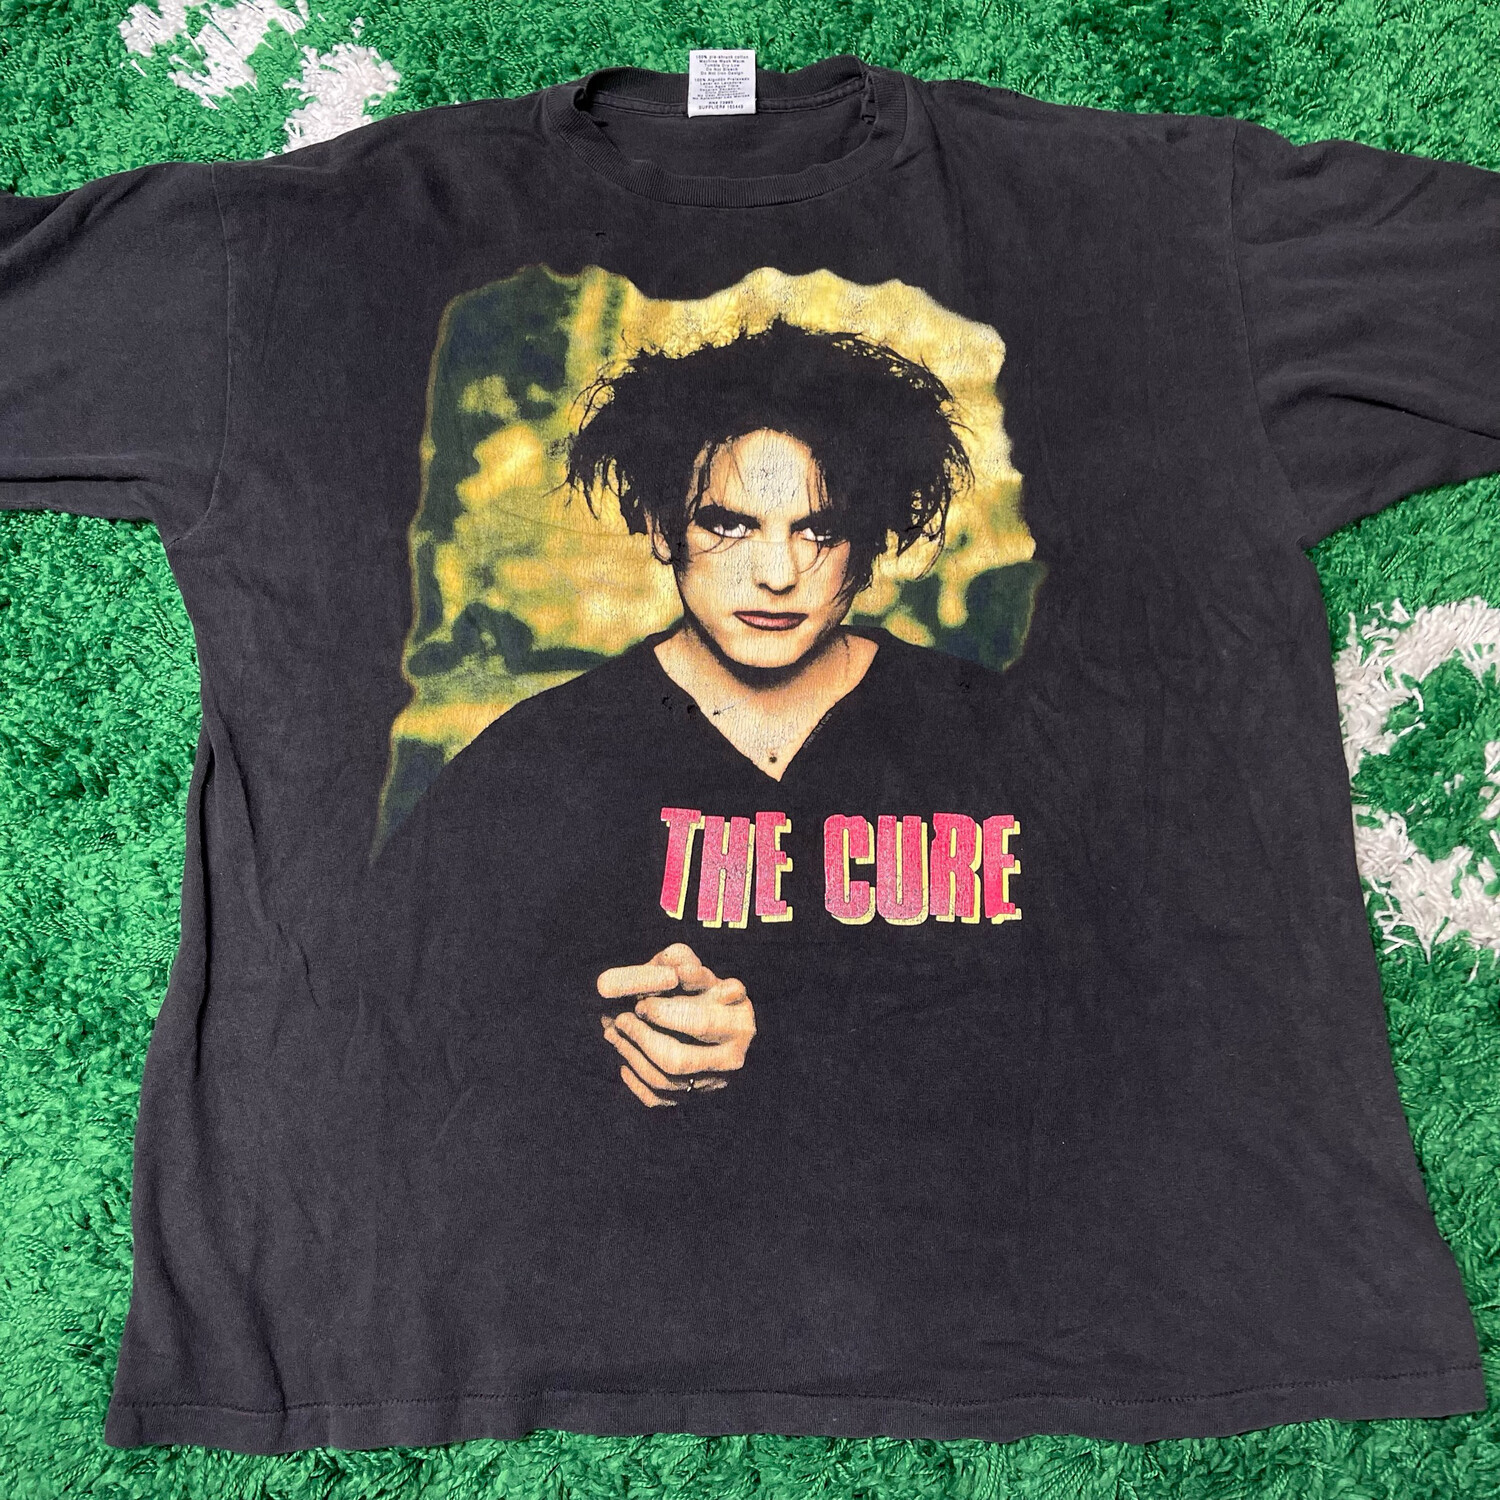 The Cure Robert Smith Tee Size XL